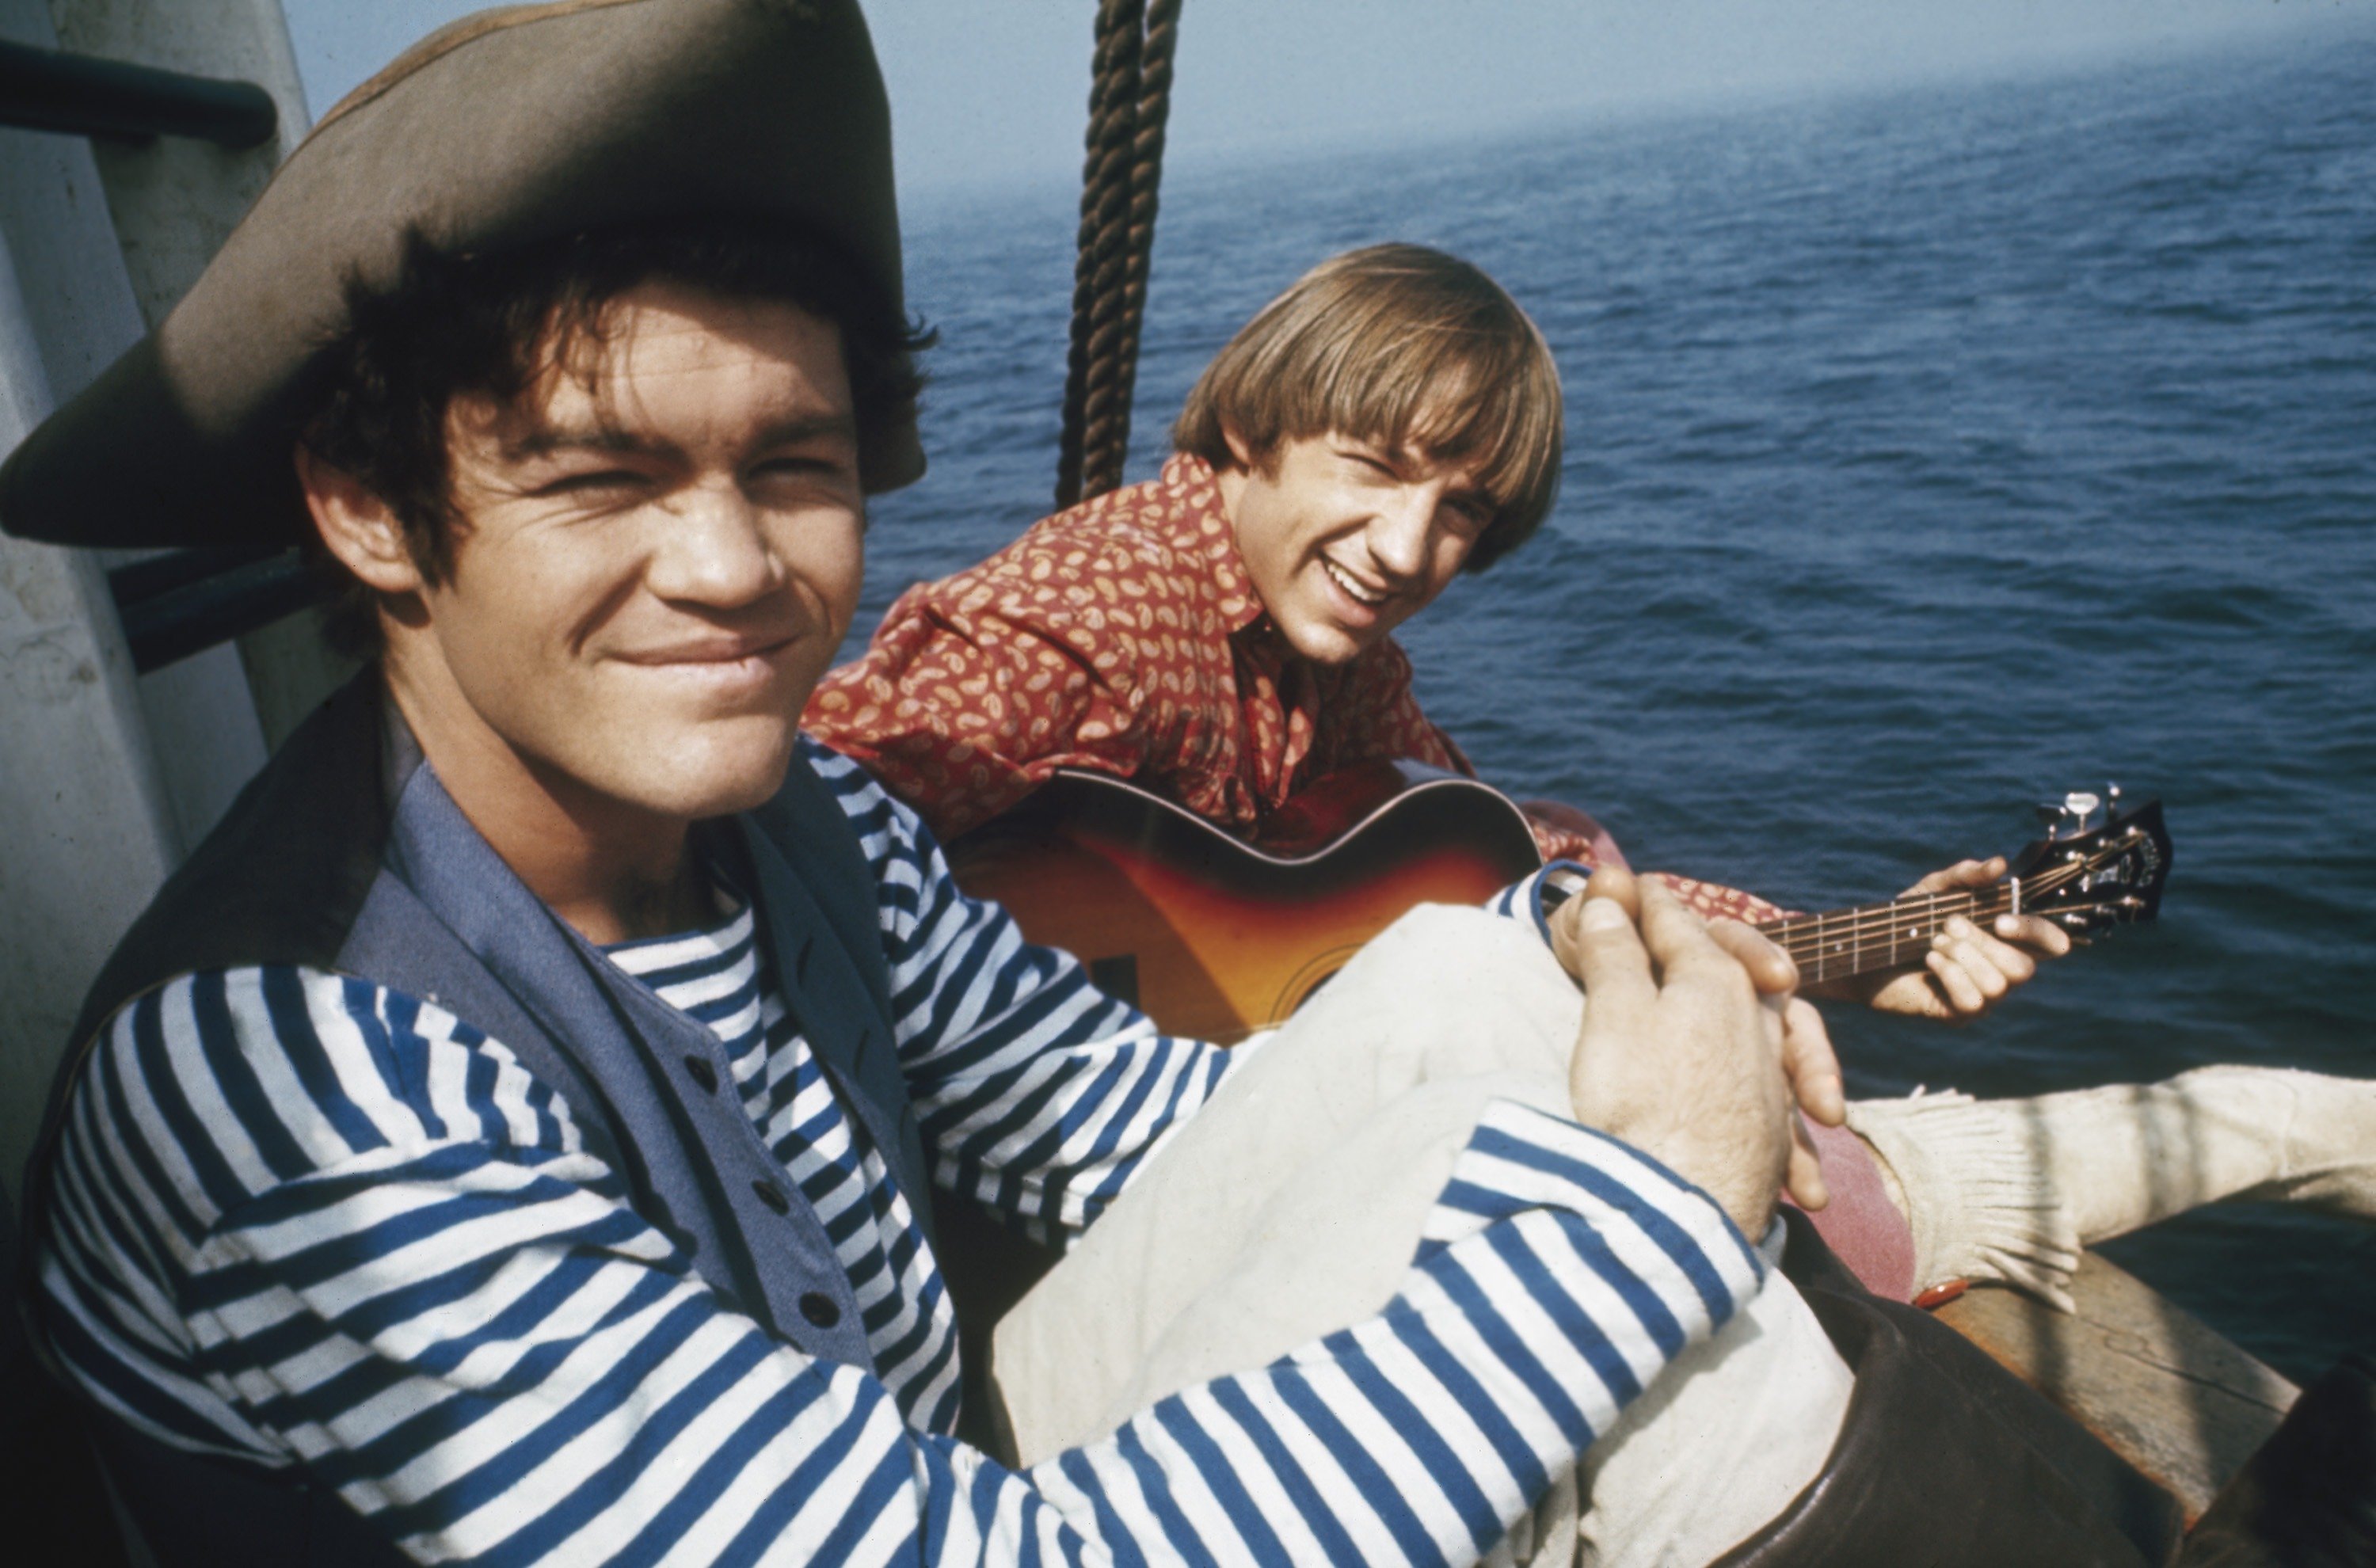 Micky Dolenz and Peter Tork on a boat during The Monkees' 'I'm a Believer" era